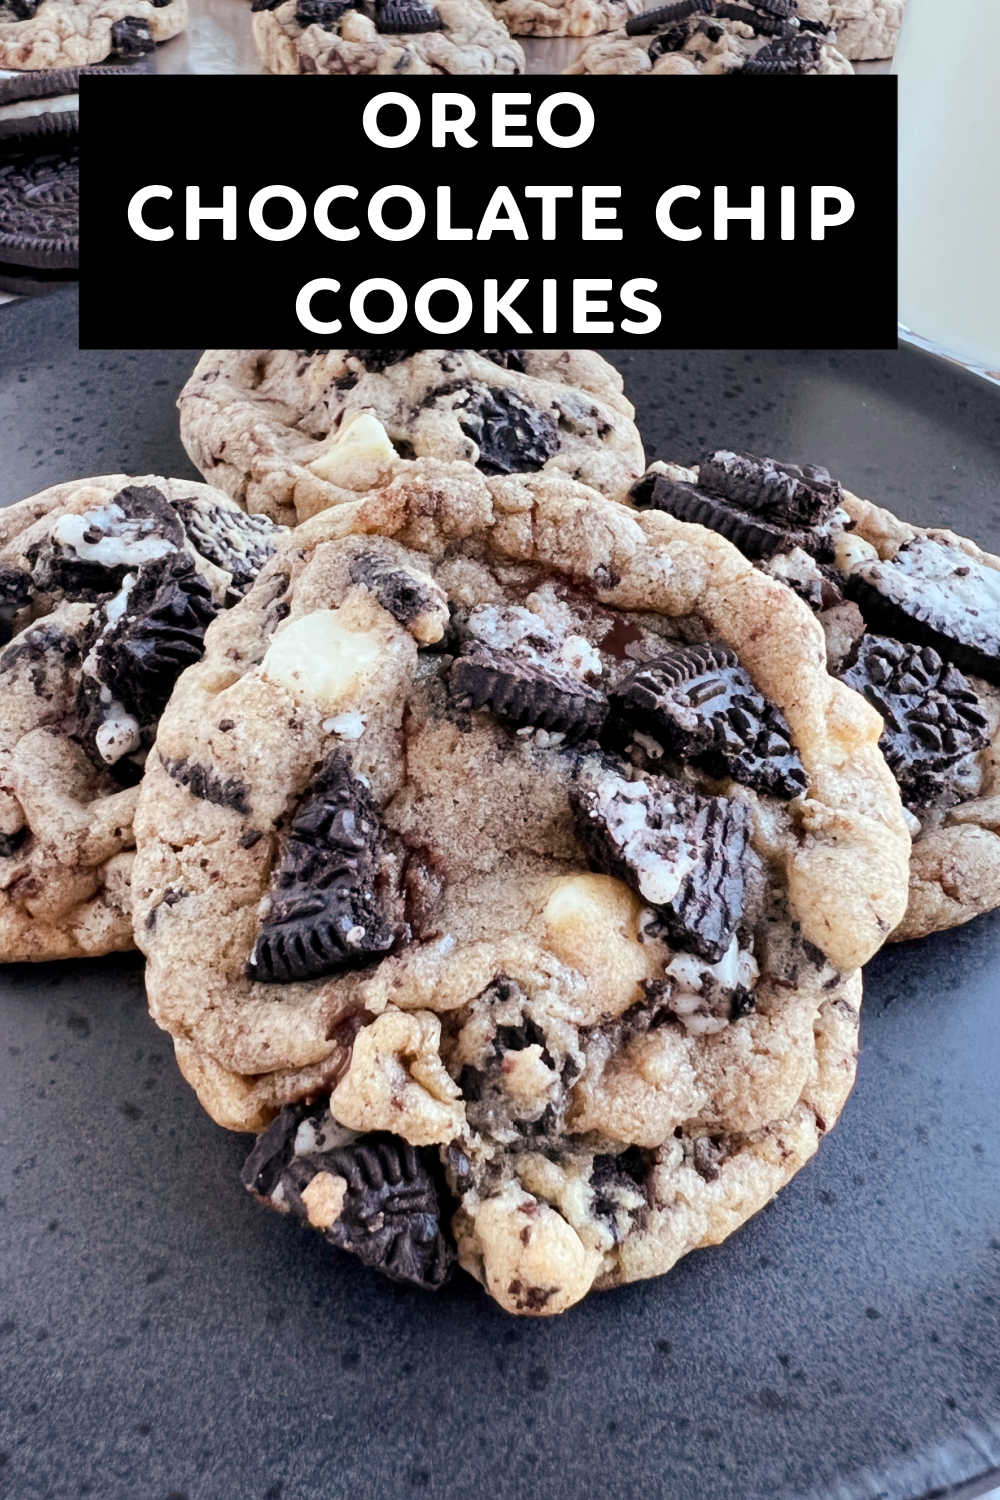 Oreo Chocolate Chip Cookies filled with Oreo cookies, chocolate chips and white chocolate chips have a chewy center and crispy edges. These delicious cookies are easy to make and perfect with a tall glass of milk! via @meamel